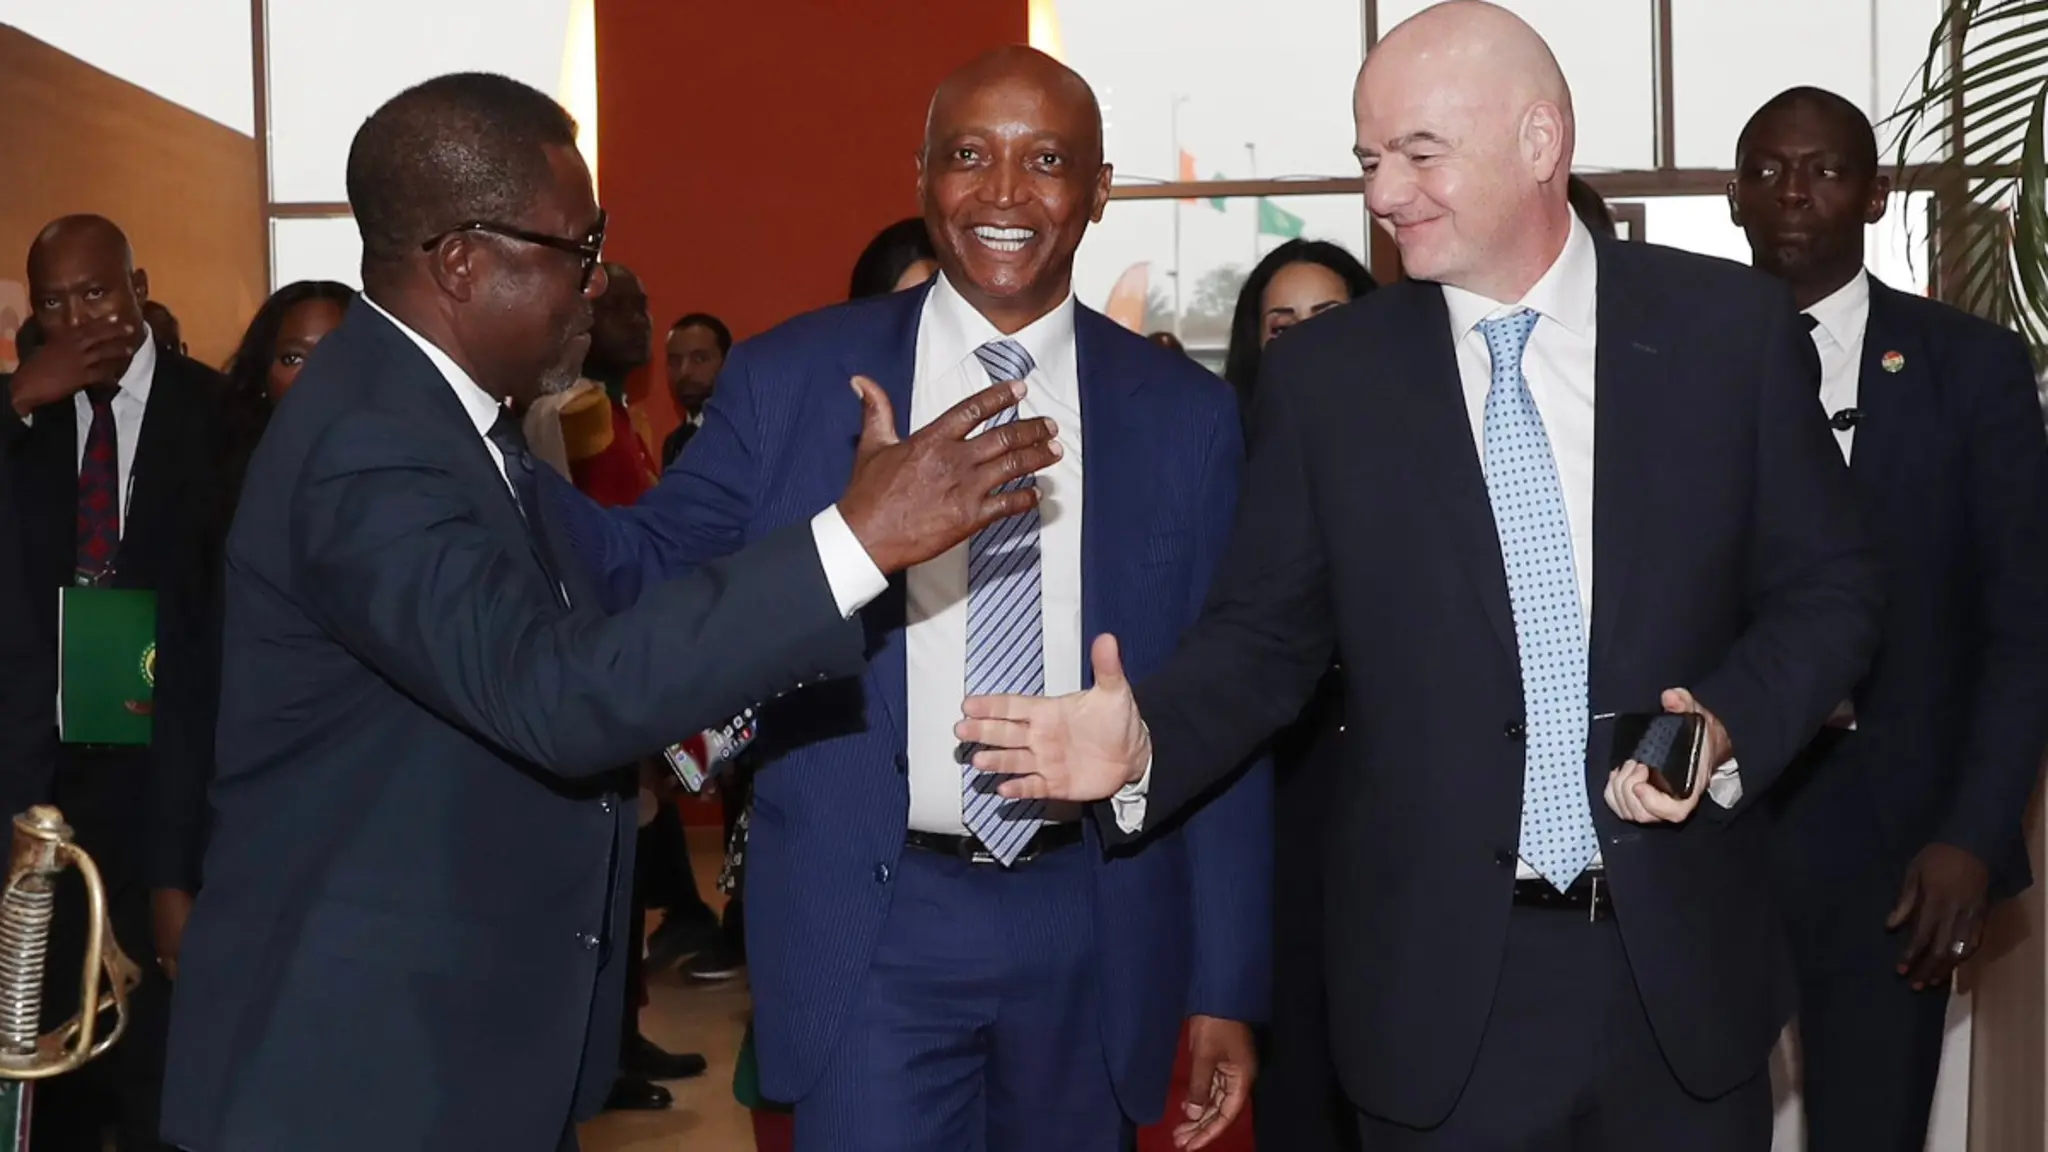 AFCON Update: FIFA President expects “fantastic tournament” after attending opener